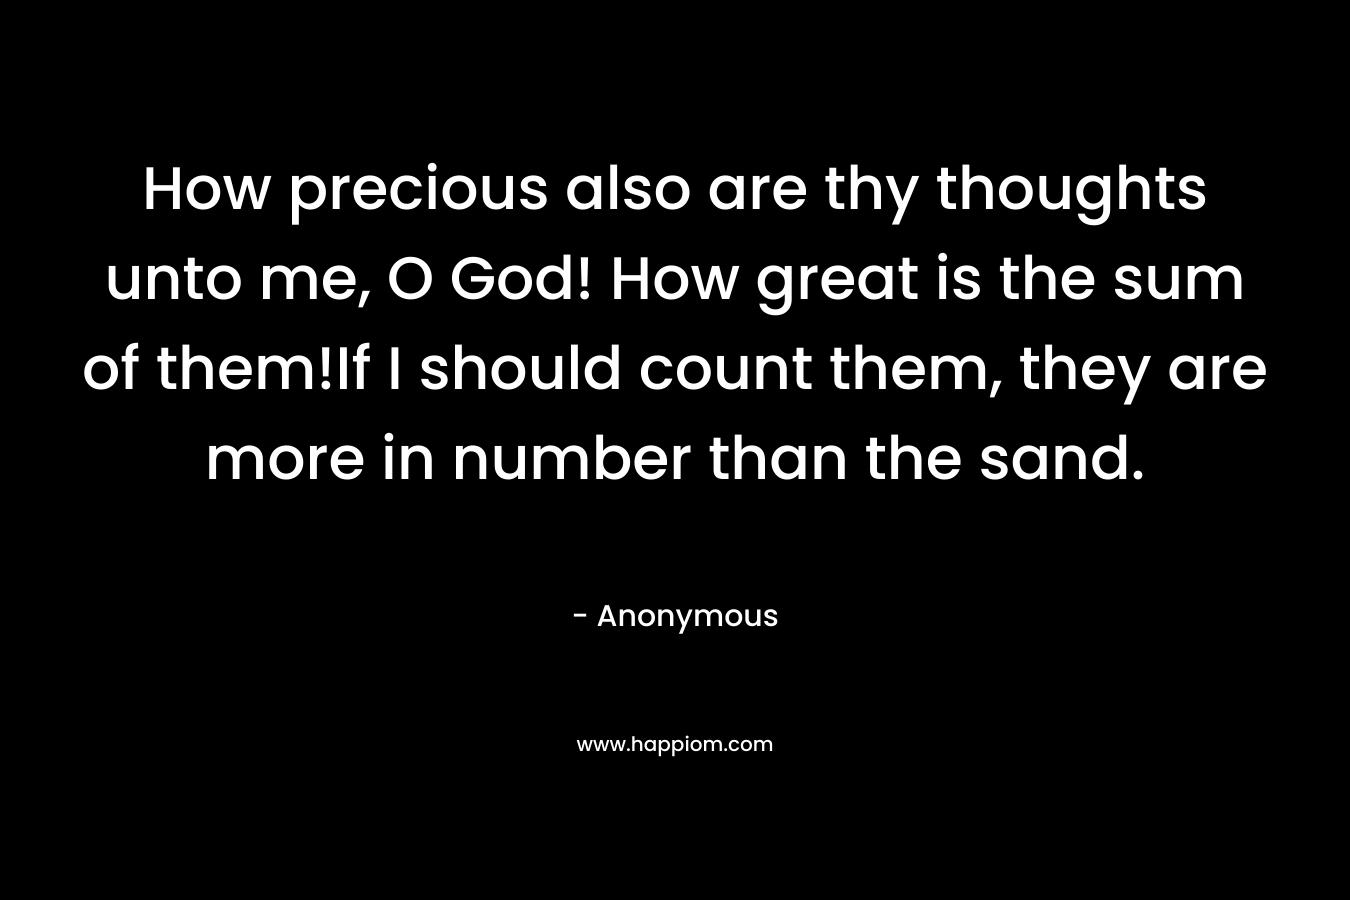 How precious also are thy thoughts unto me, O God! How great is the sum of them!If I should count them, they are more in number than the sand.